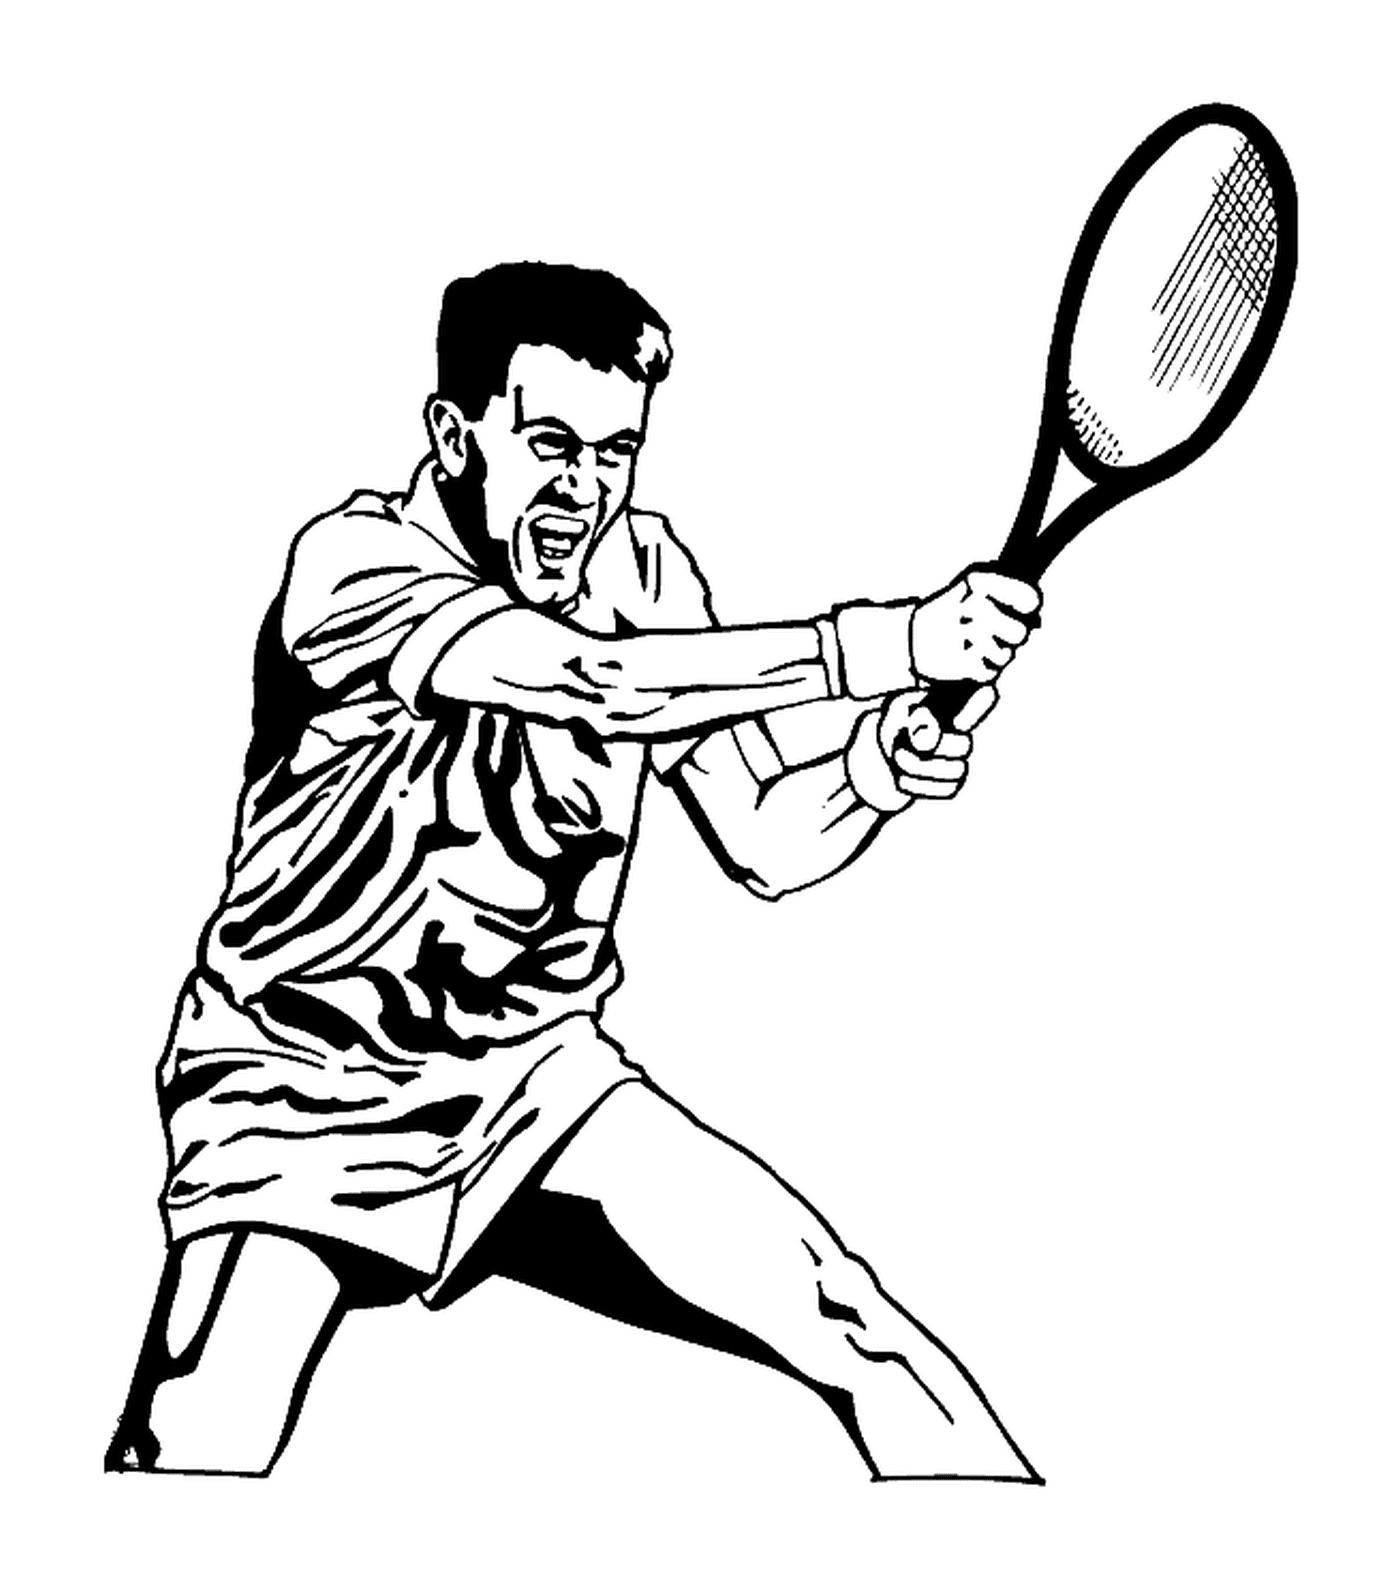  A tennis player in action 